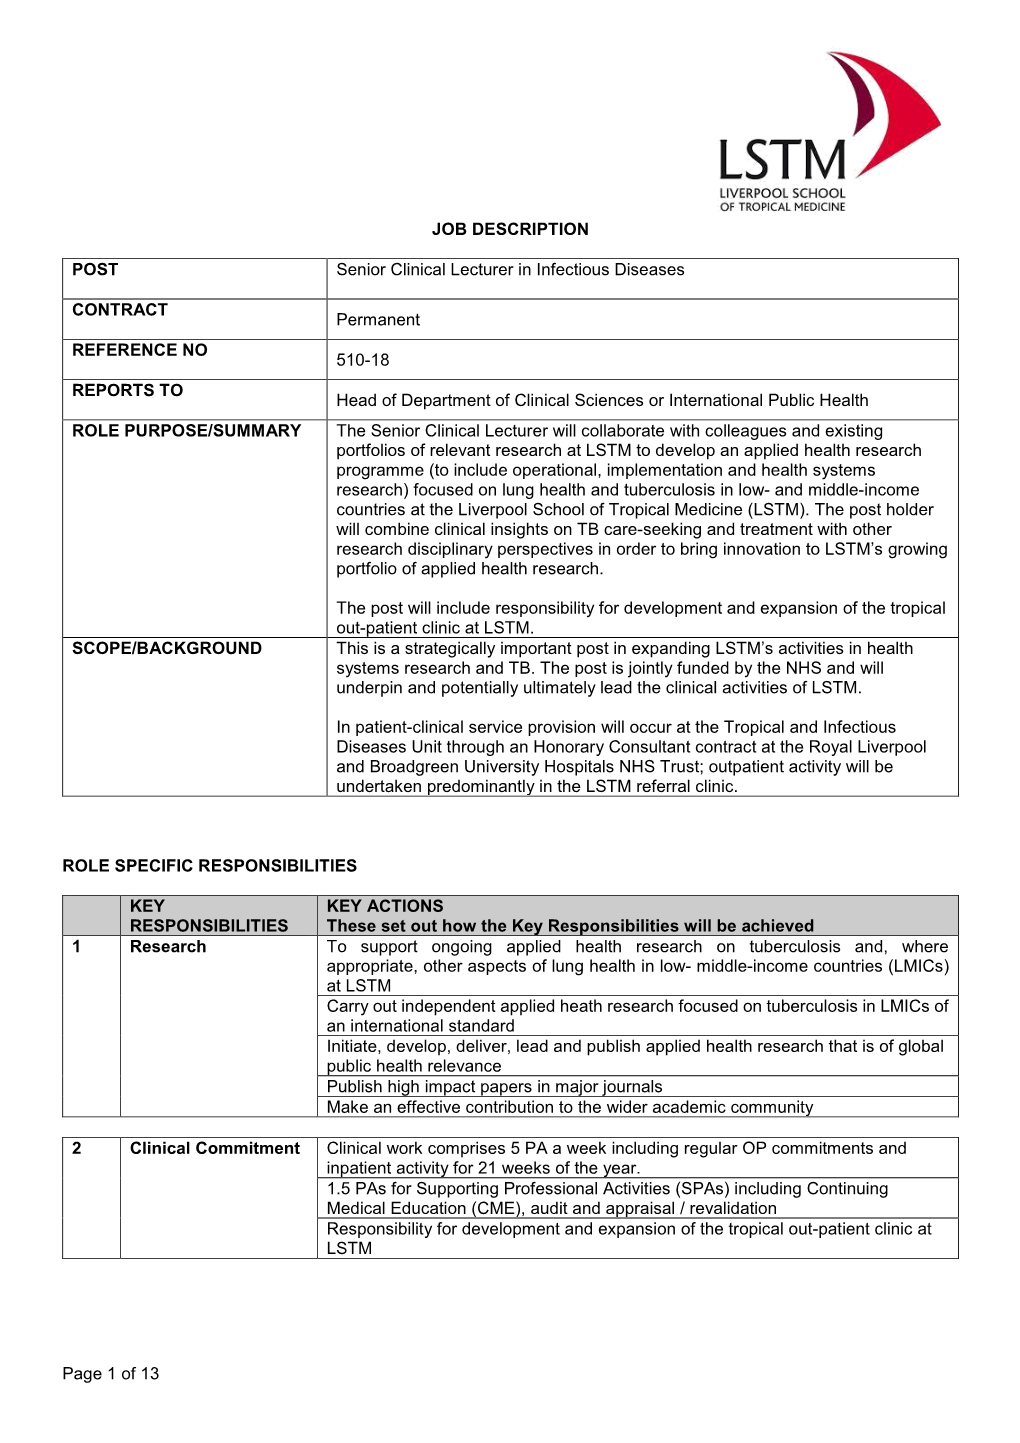 Page 1 of 13 JOB DESCRIPTION POST Senior Clinical Lecturer in Infectious Diseases CONTRACT Permanent REFERENCE NO 510-18 REPORTS